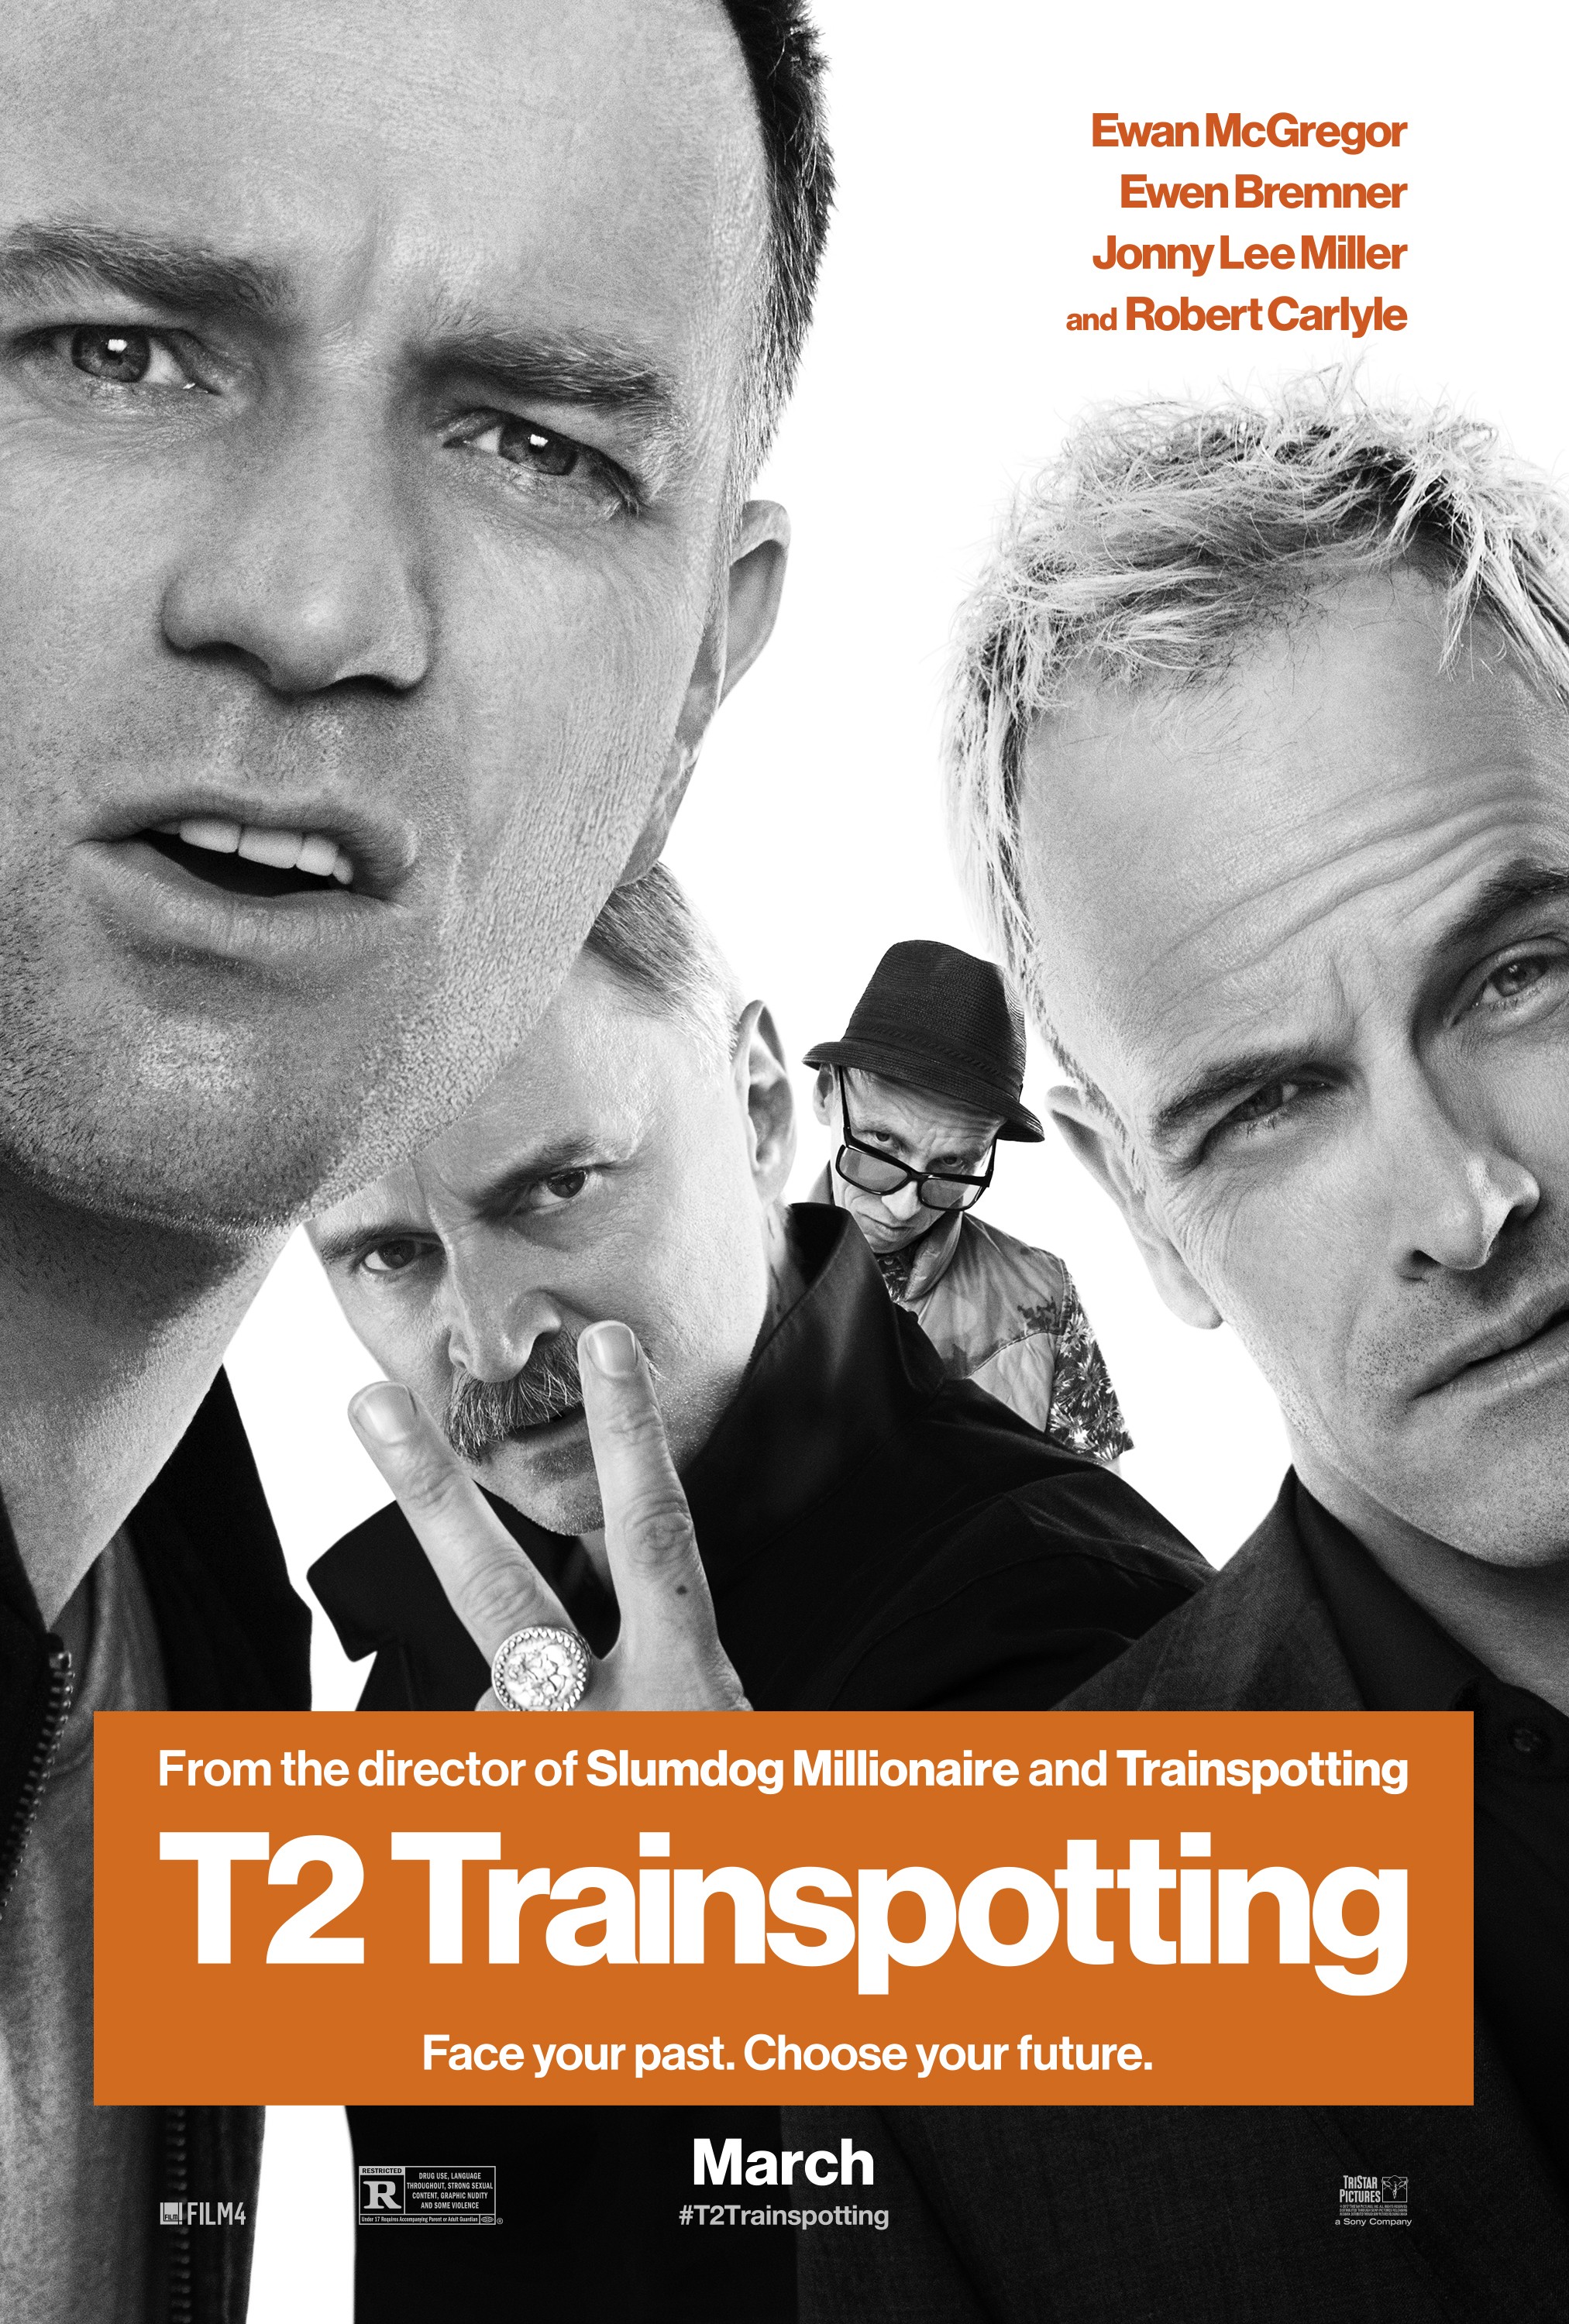 trainspotting characters